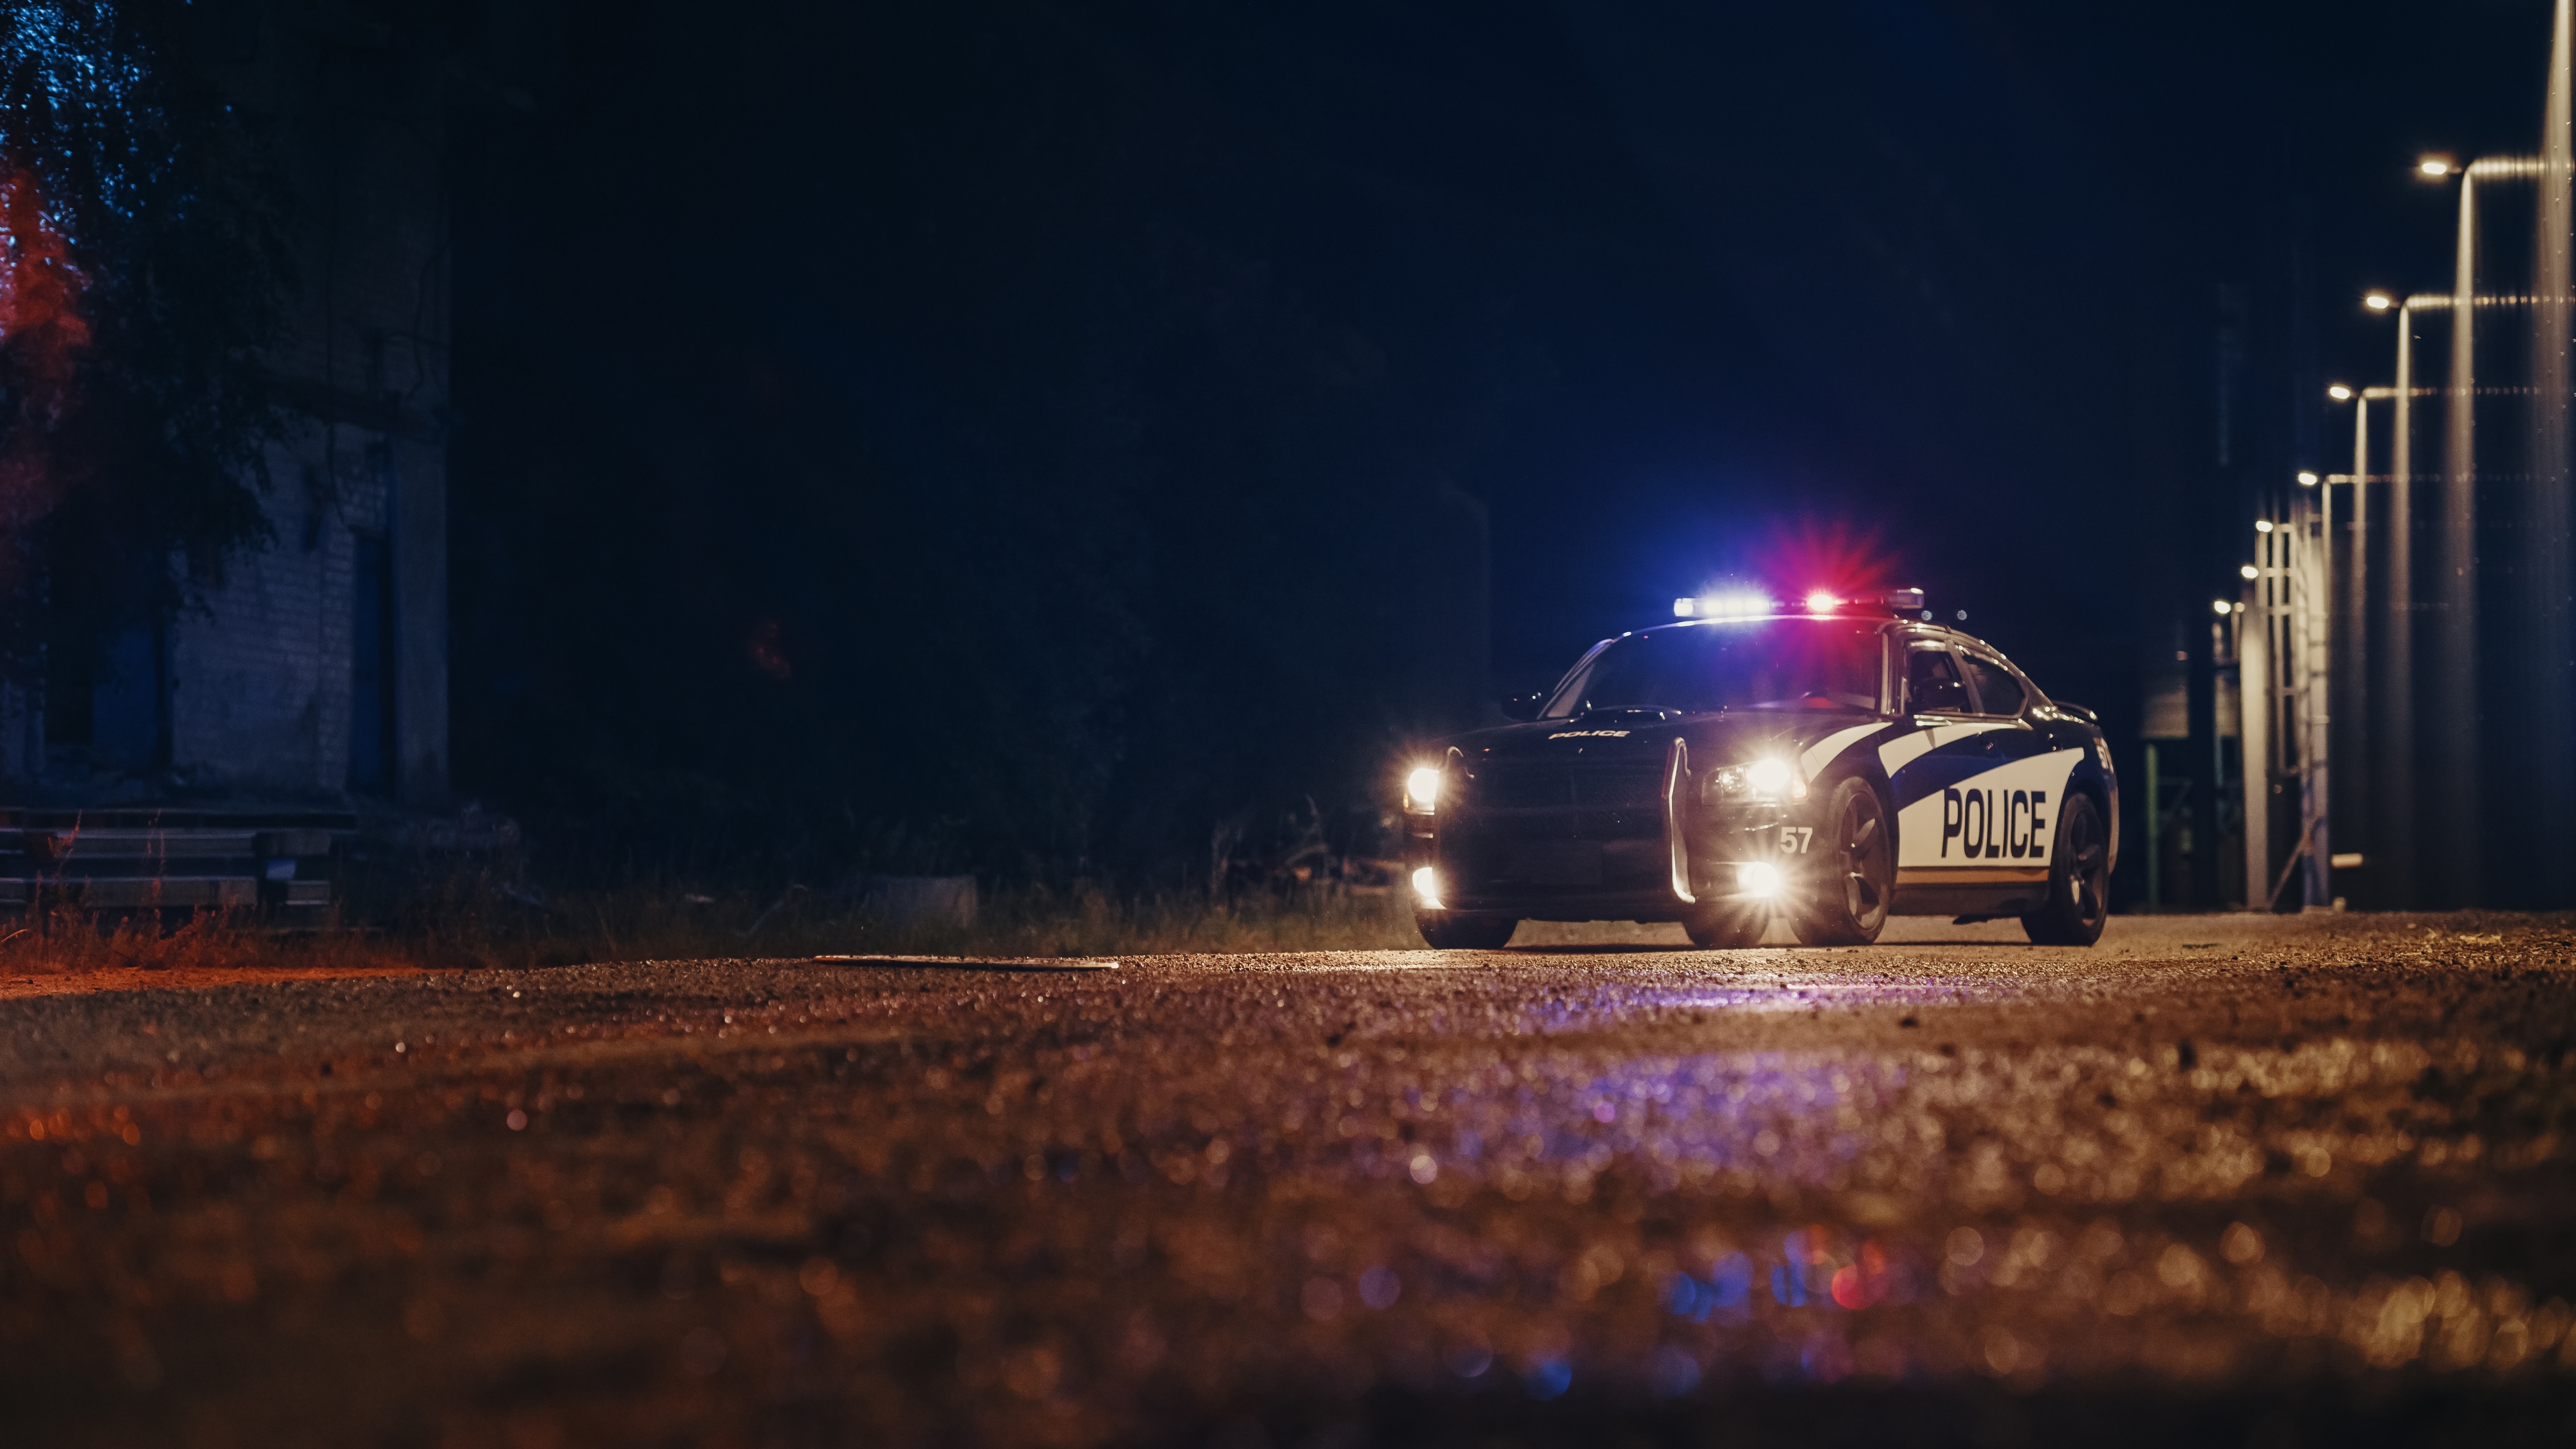 Low Angle Shot of a Stopped Police Car with Lights and Siren on During a Misty Night. Patrolling Vehicle on Stand by, Waiting for Orders to Start Pursuing Suspects. Police Enforcement | Source: Shutterstock